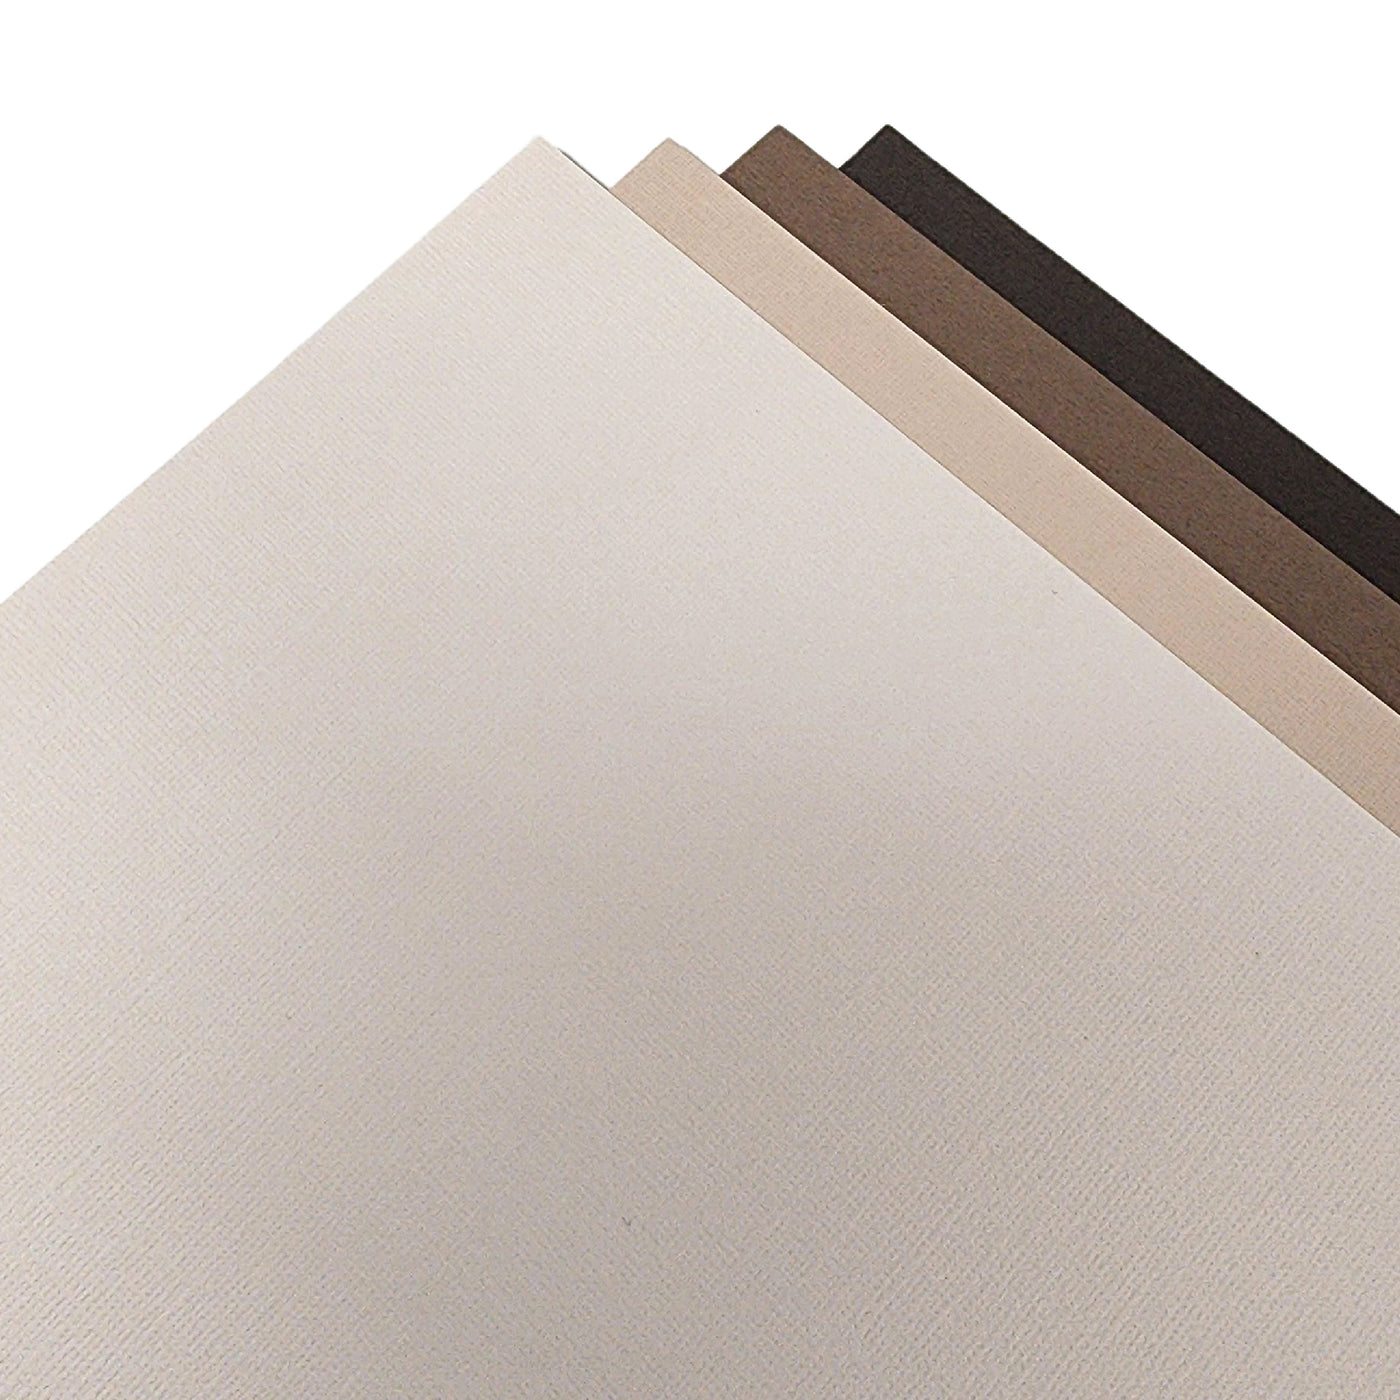 12x12 cardstock shop neutrals variety pack by bazzill - (pack of 10), 12x12  cardstock paper - assorted colors, textured cardstock variety pack cra